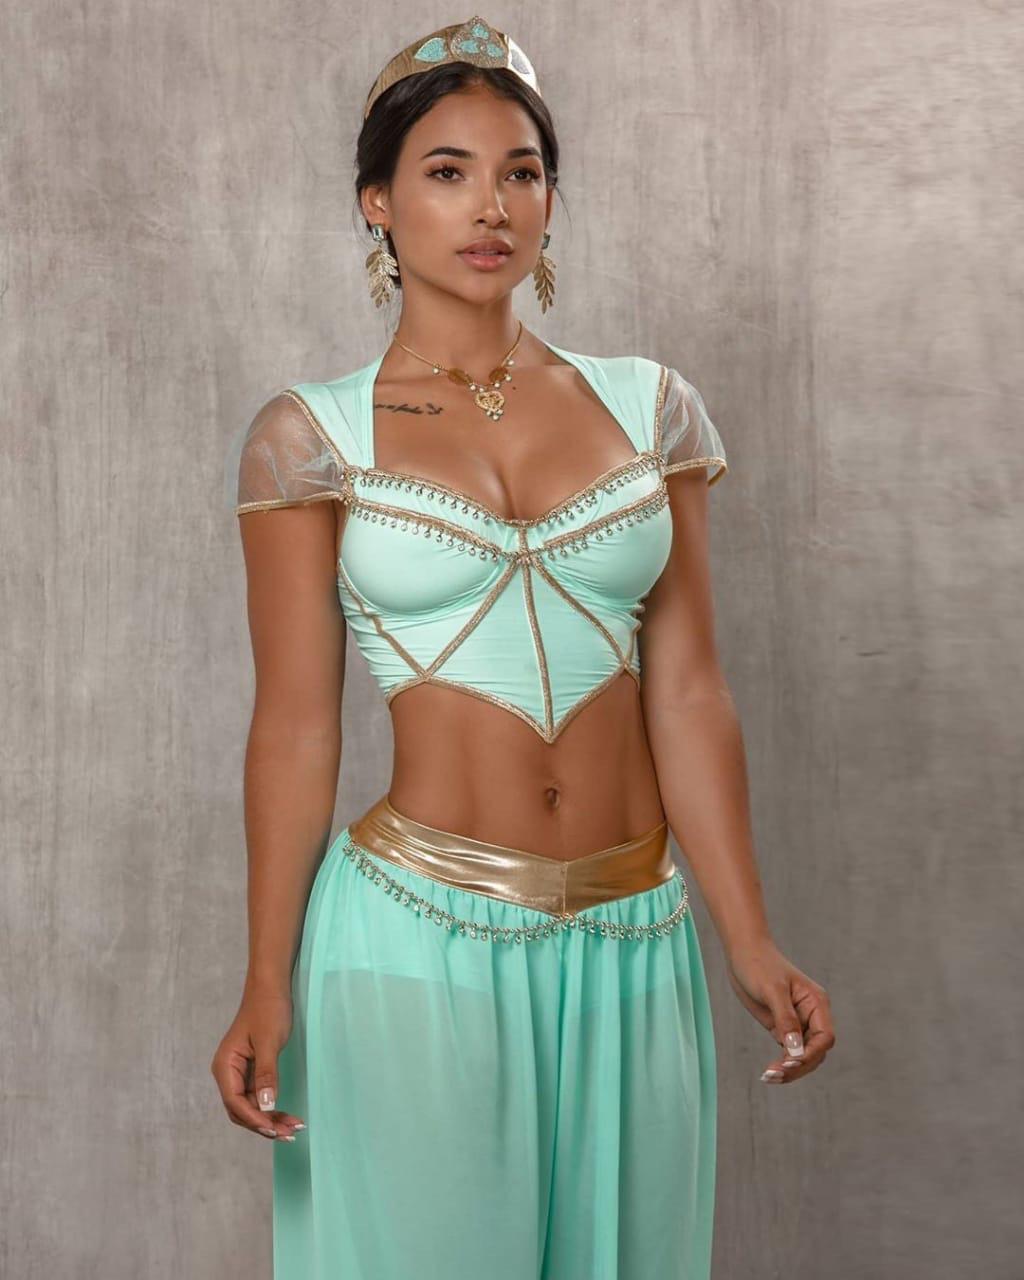 Princess Jasmine By Andrea Coope